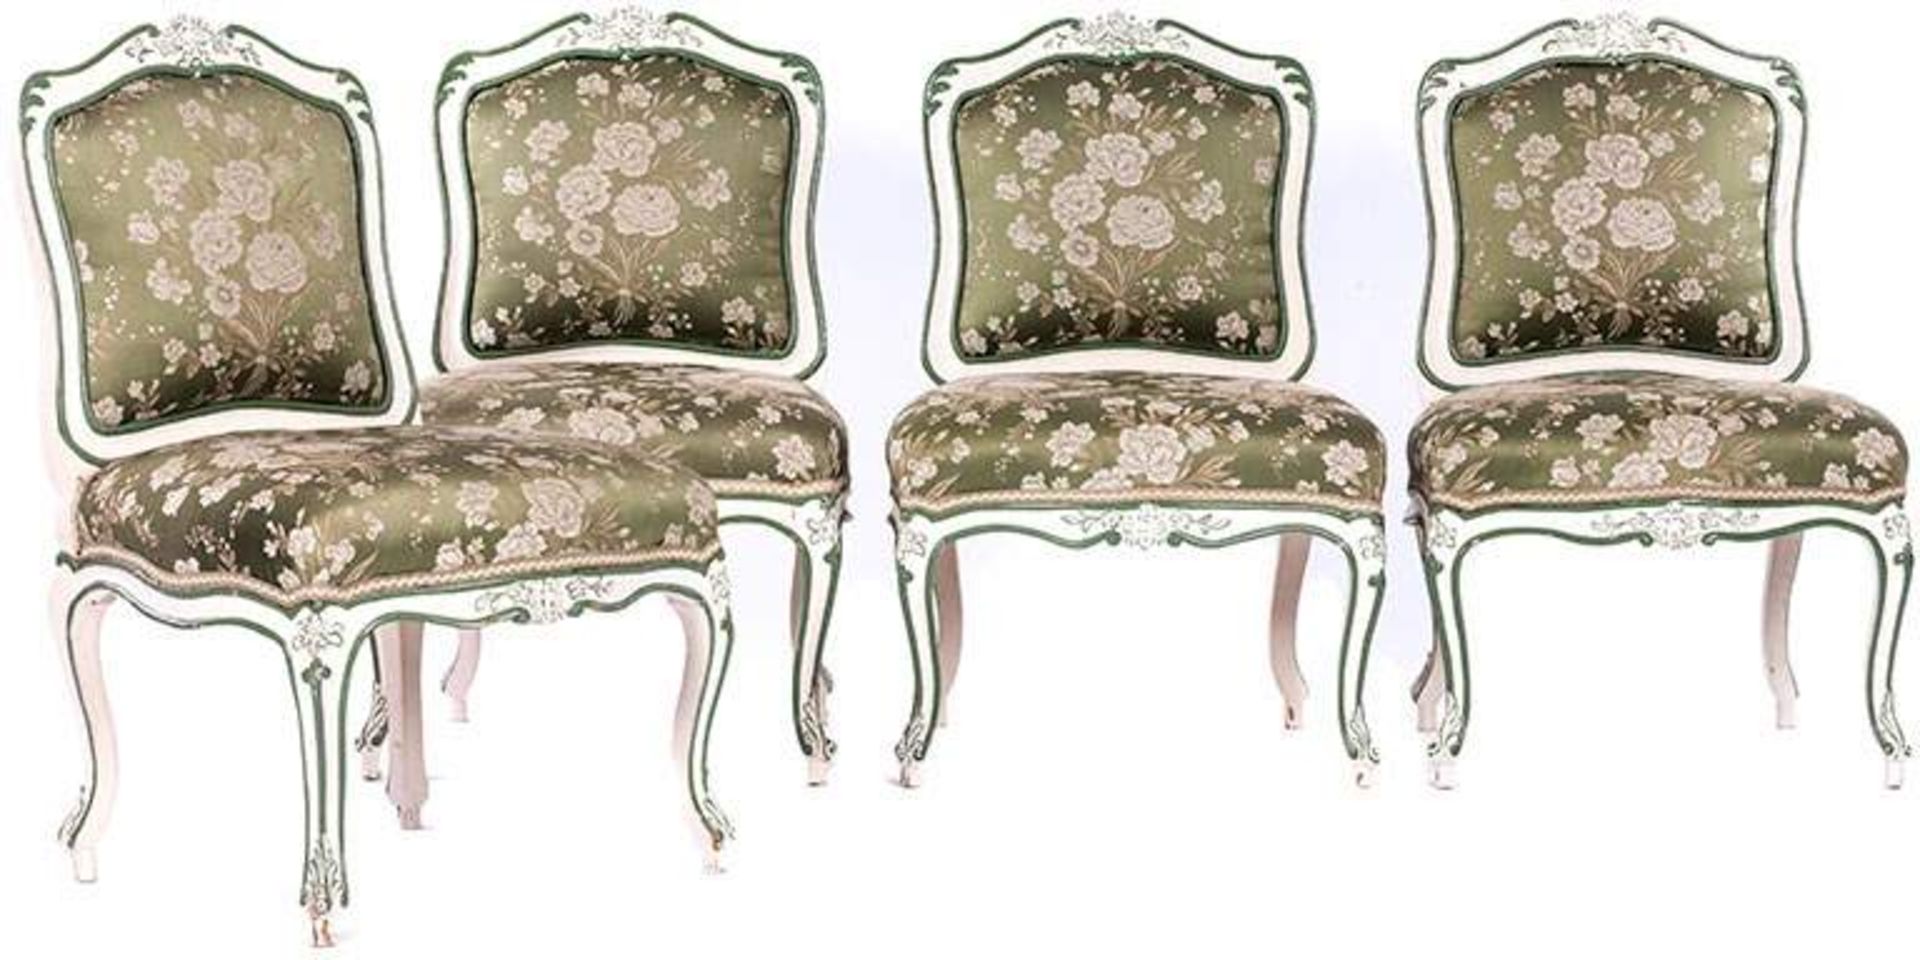 Set of four Baroque chairs from the German princely House of Thurn und TaxisHeight: 90.5 cm.